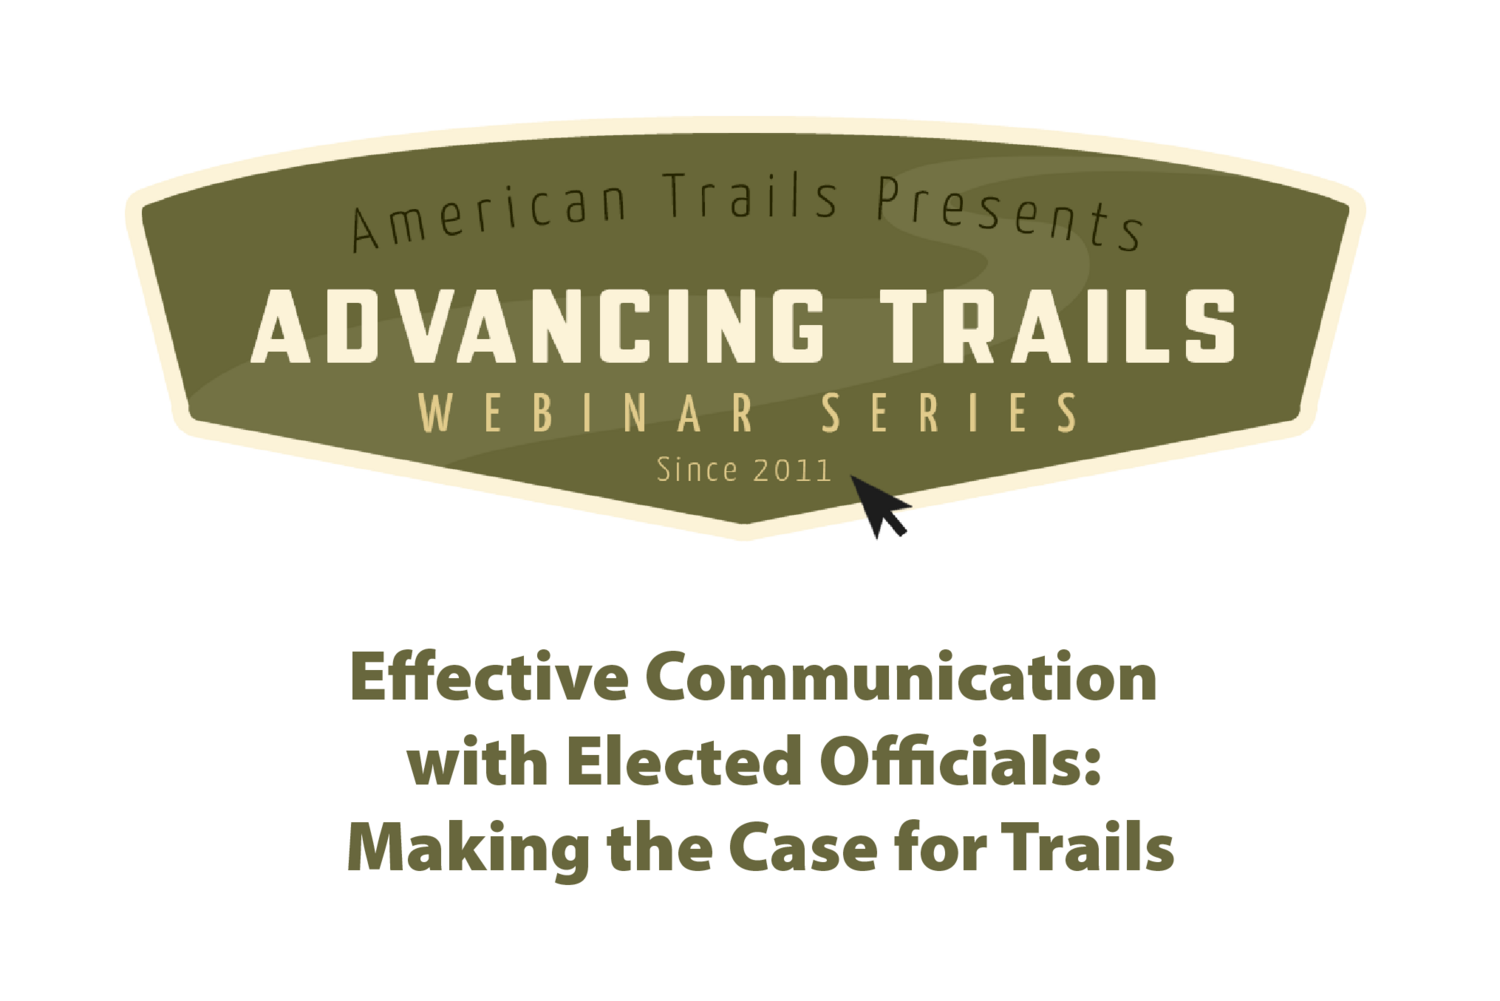 Effective Communication with Elected Officials: Making the Case for Trails (RECORDING)